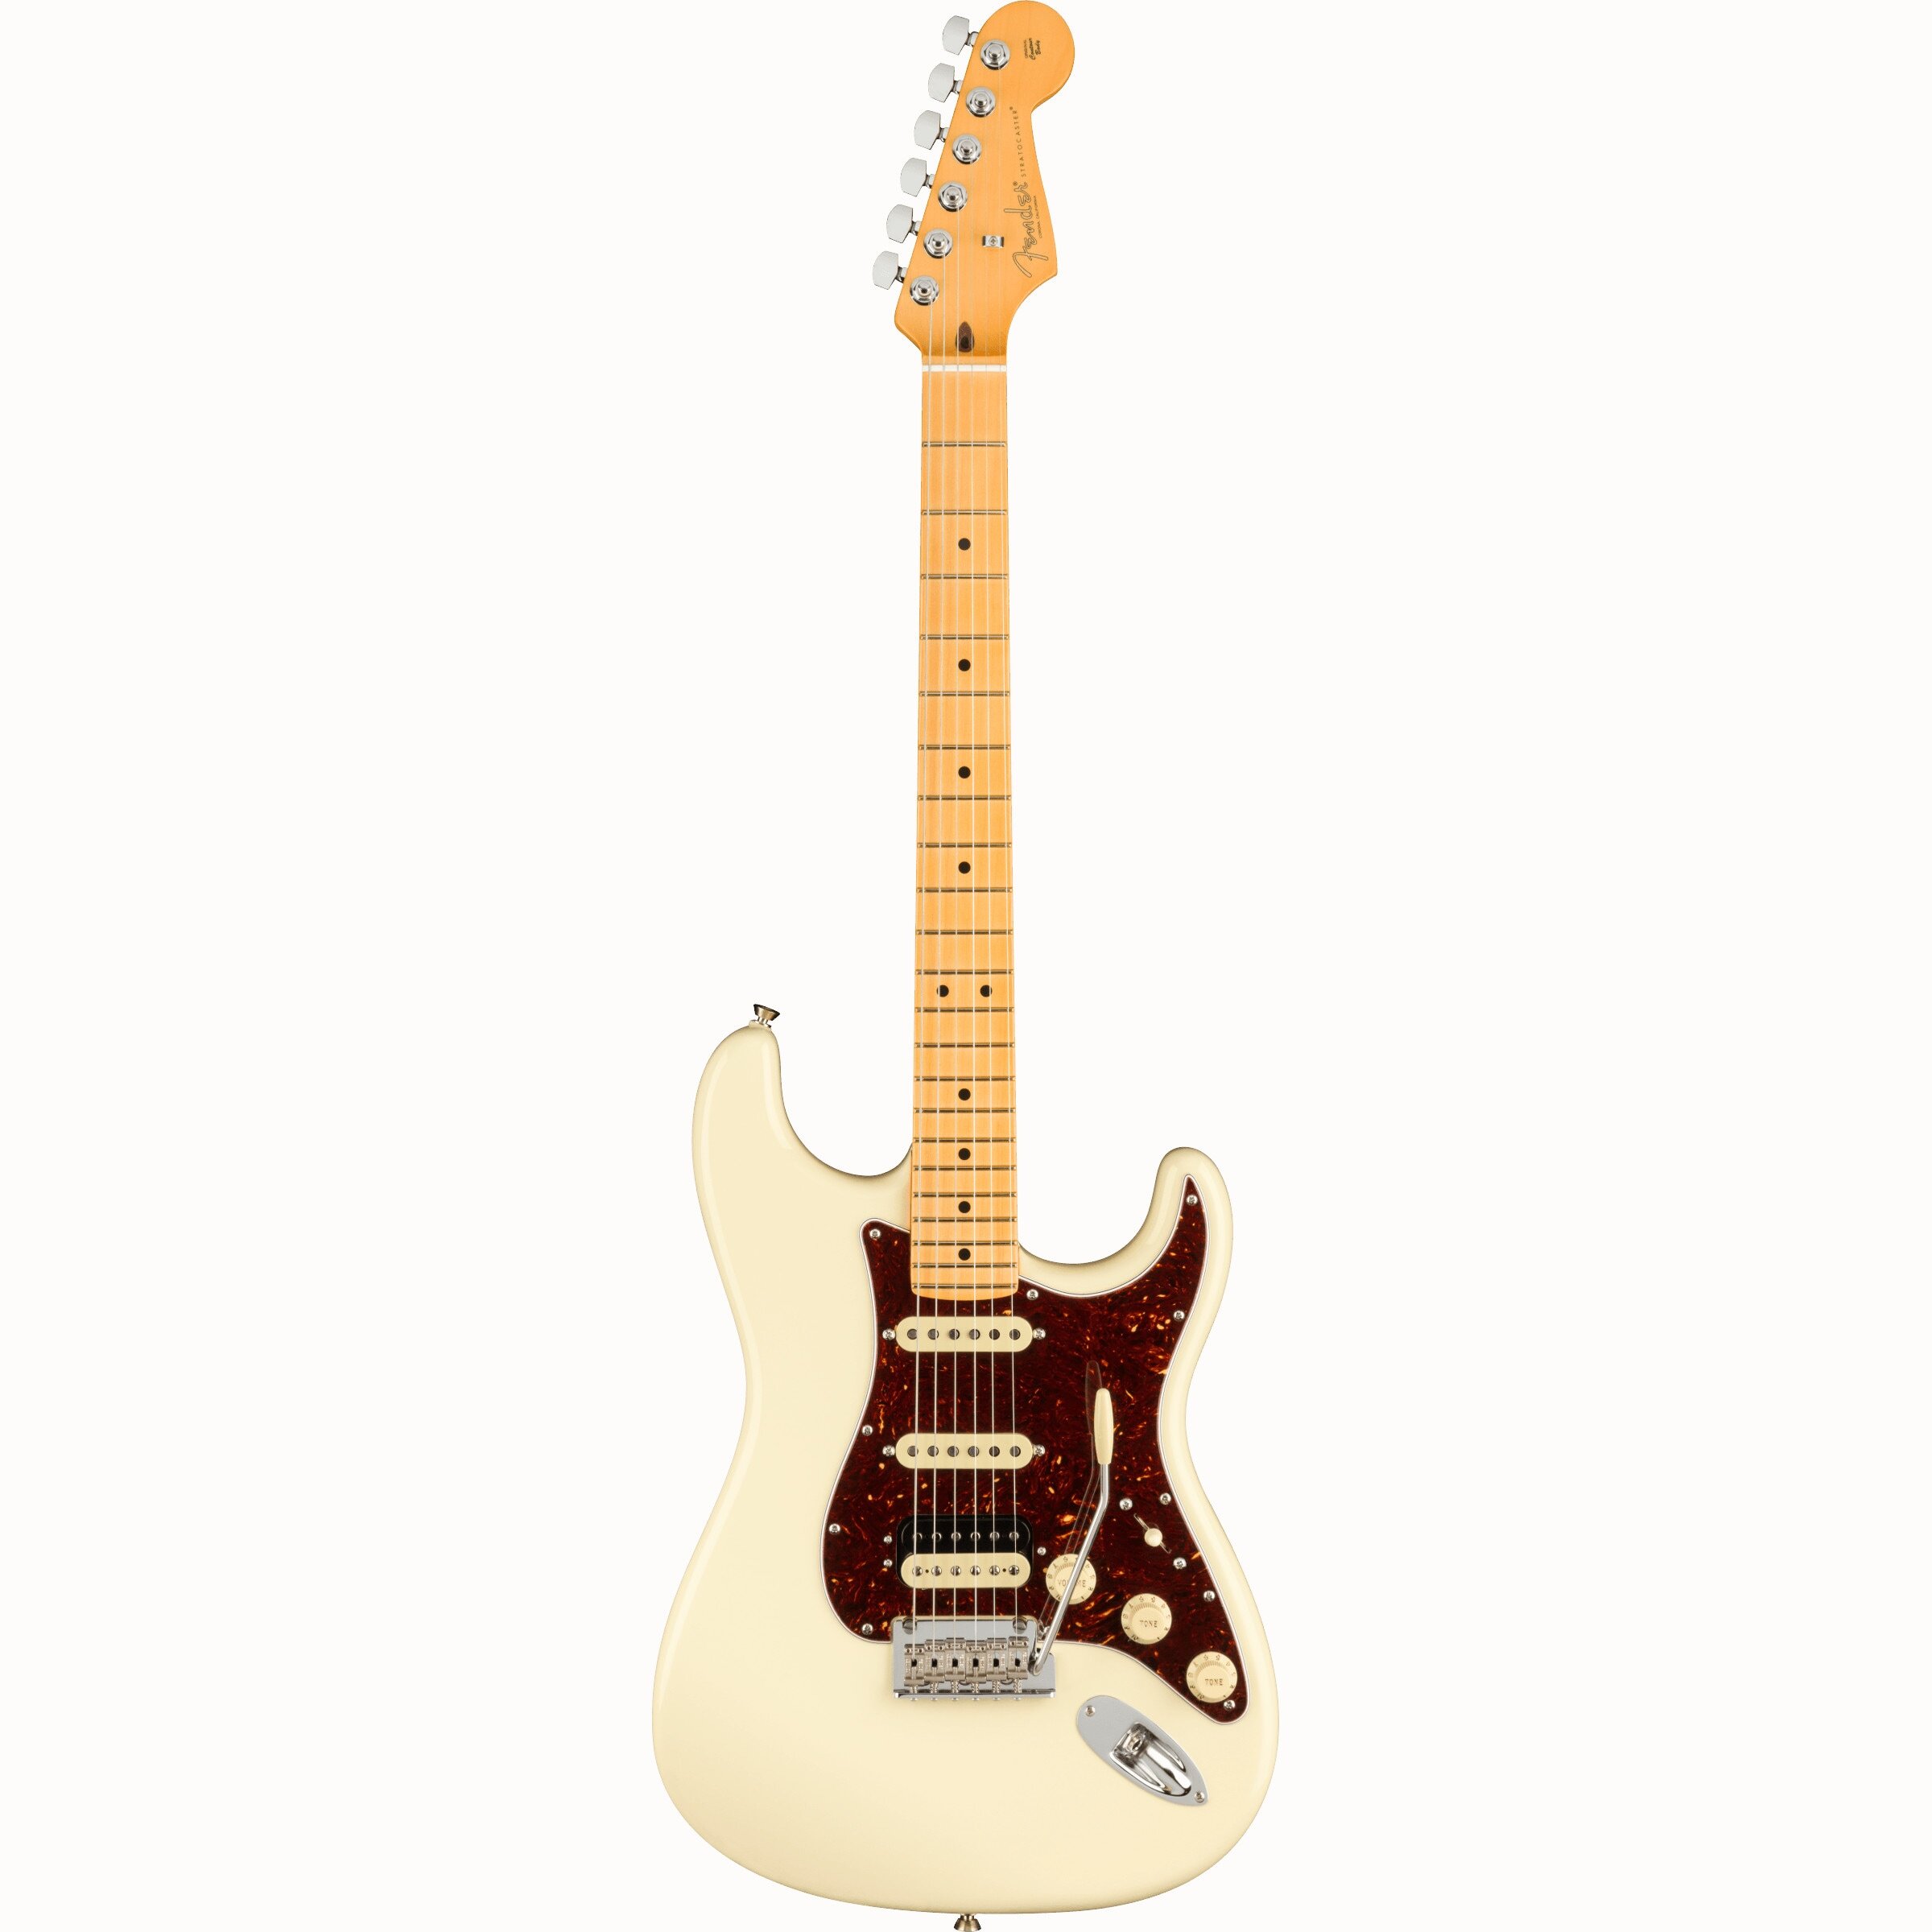 Fender American Professional II Stratocaster HSS Olympic White MN